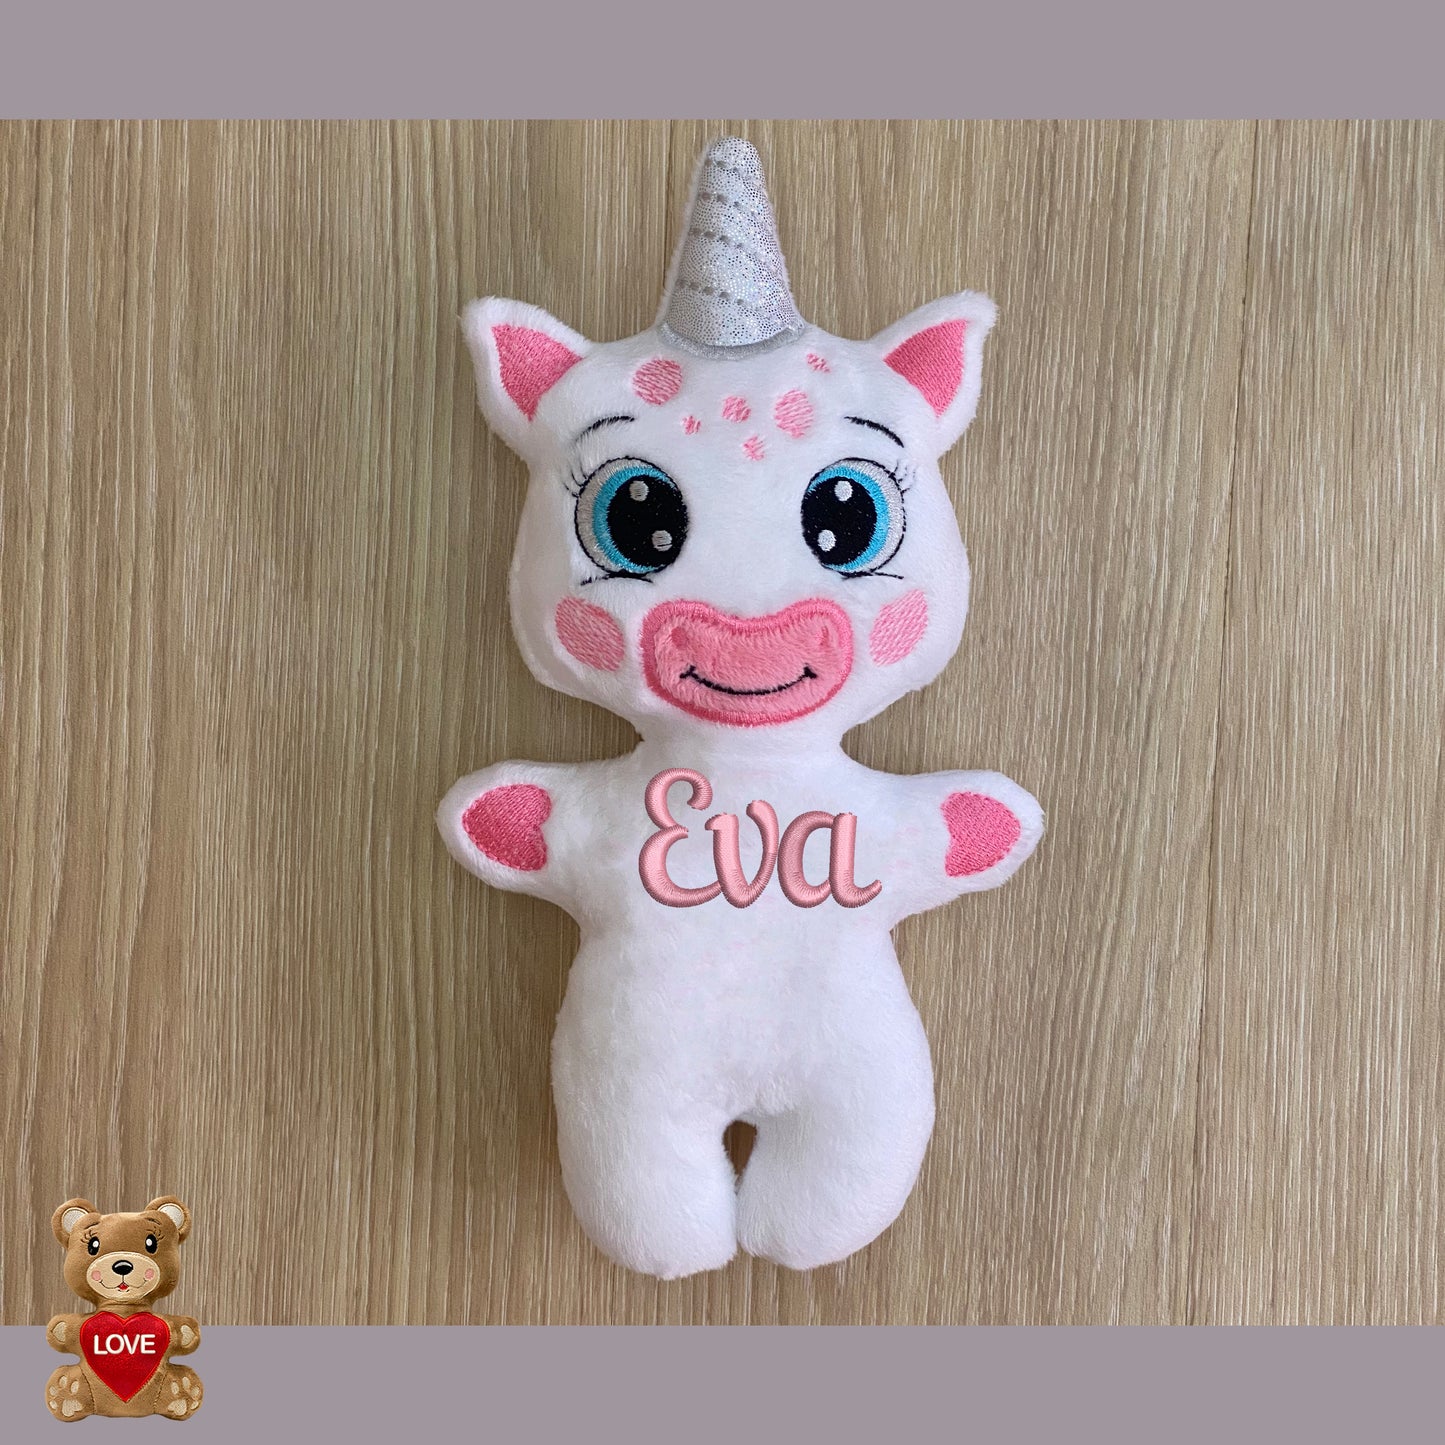 Personalised Cute Unicorn Stuffed toy ,Super cute personalised soft plush toy, Personalised Gift, Unique Personalized Birthday Gifts , Custom Gifts For Children